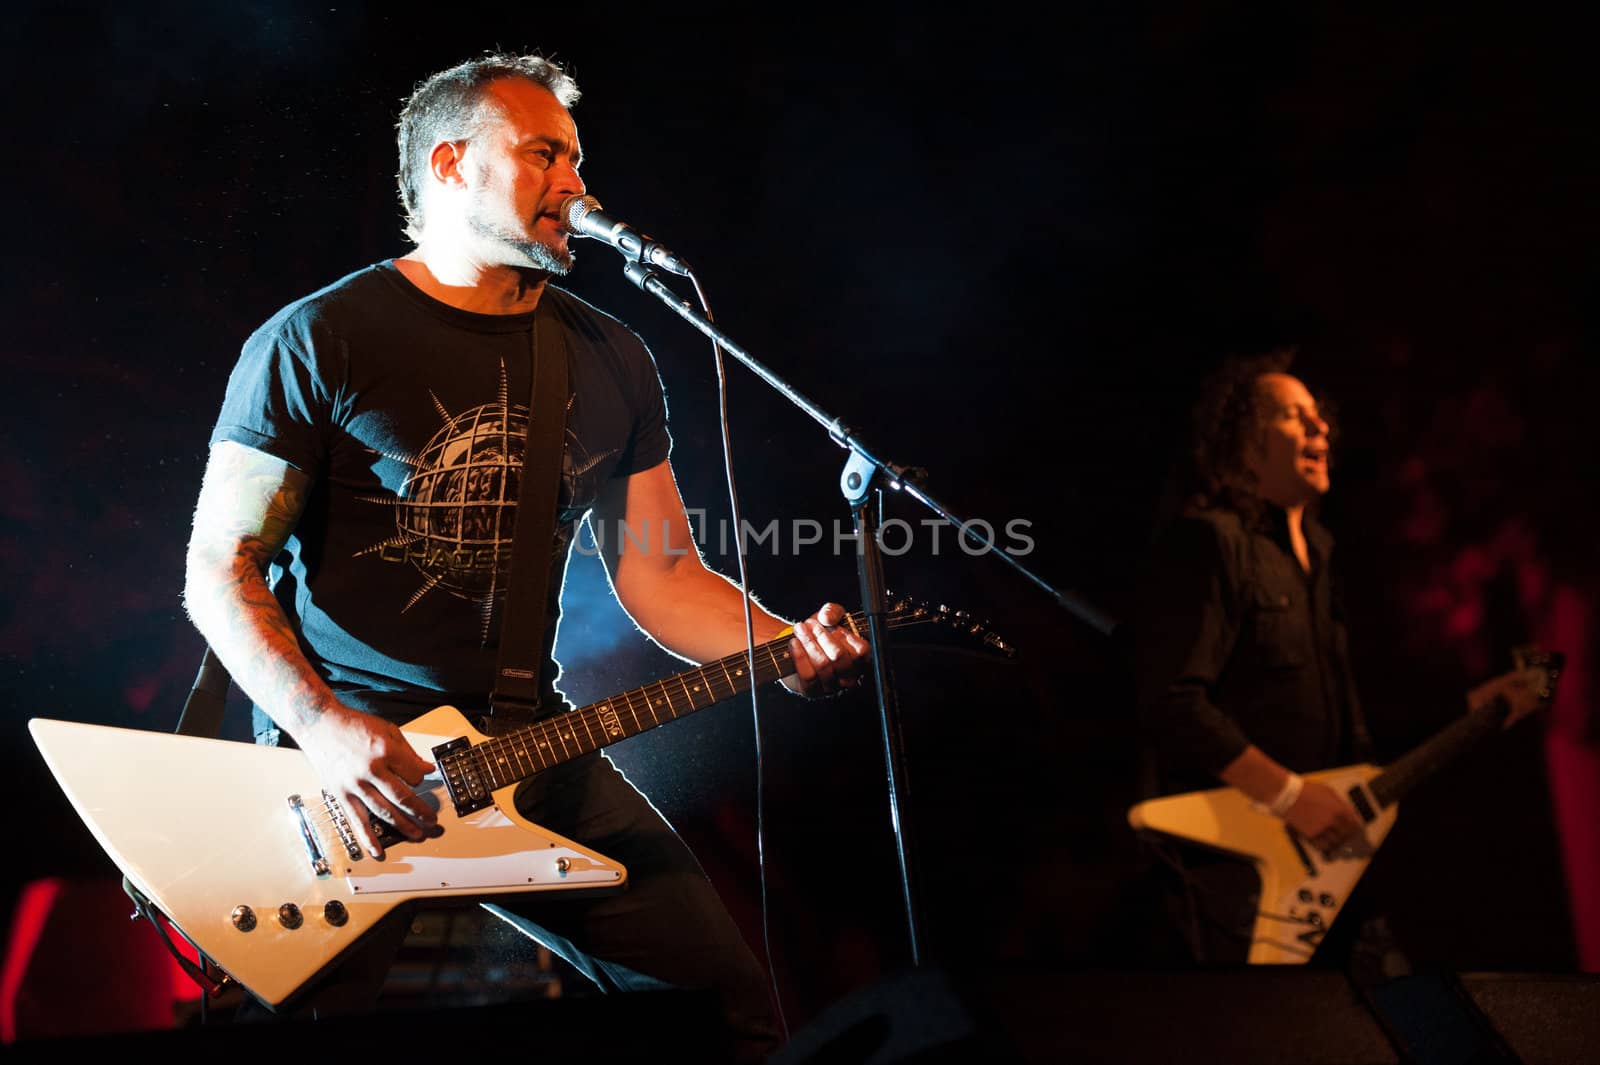 CANARY ISLANDS, SPAIN-JUNE 30: Brigido Duque(l) and Rafael Redin(r) from the band Koma, from Navarra in Spain, perform during Cebollinazo Rock in Galdar on June 30, 2012 in Canary Islands, Spain
